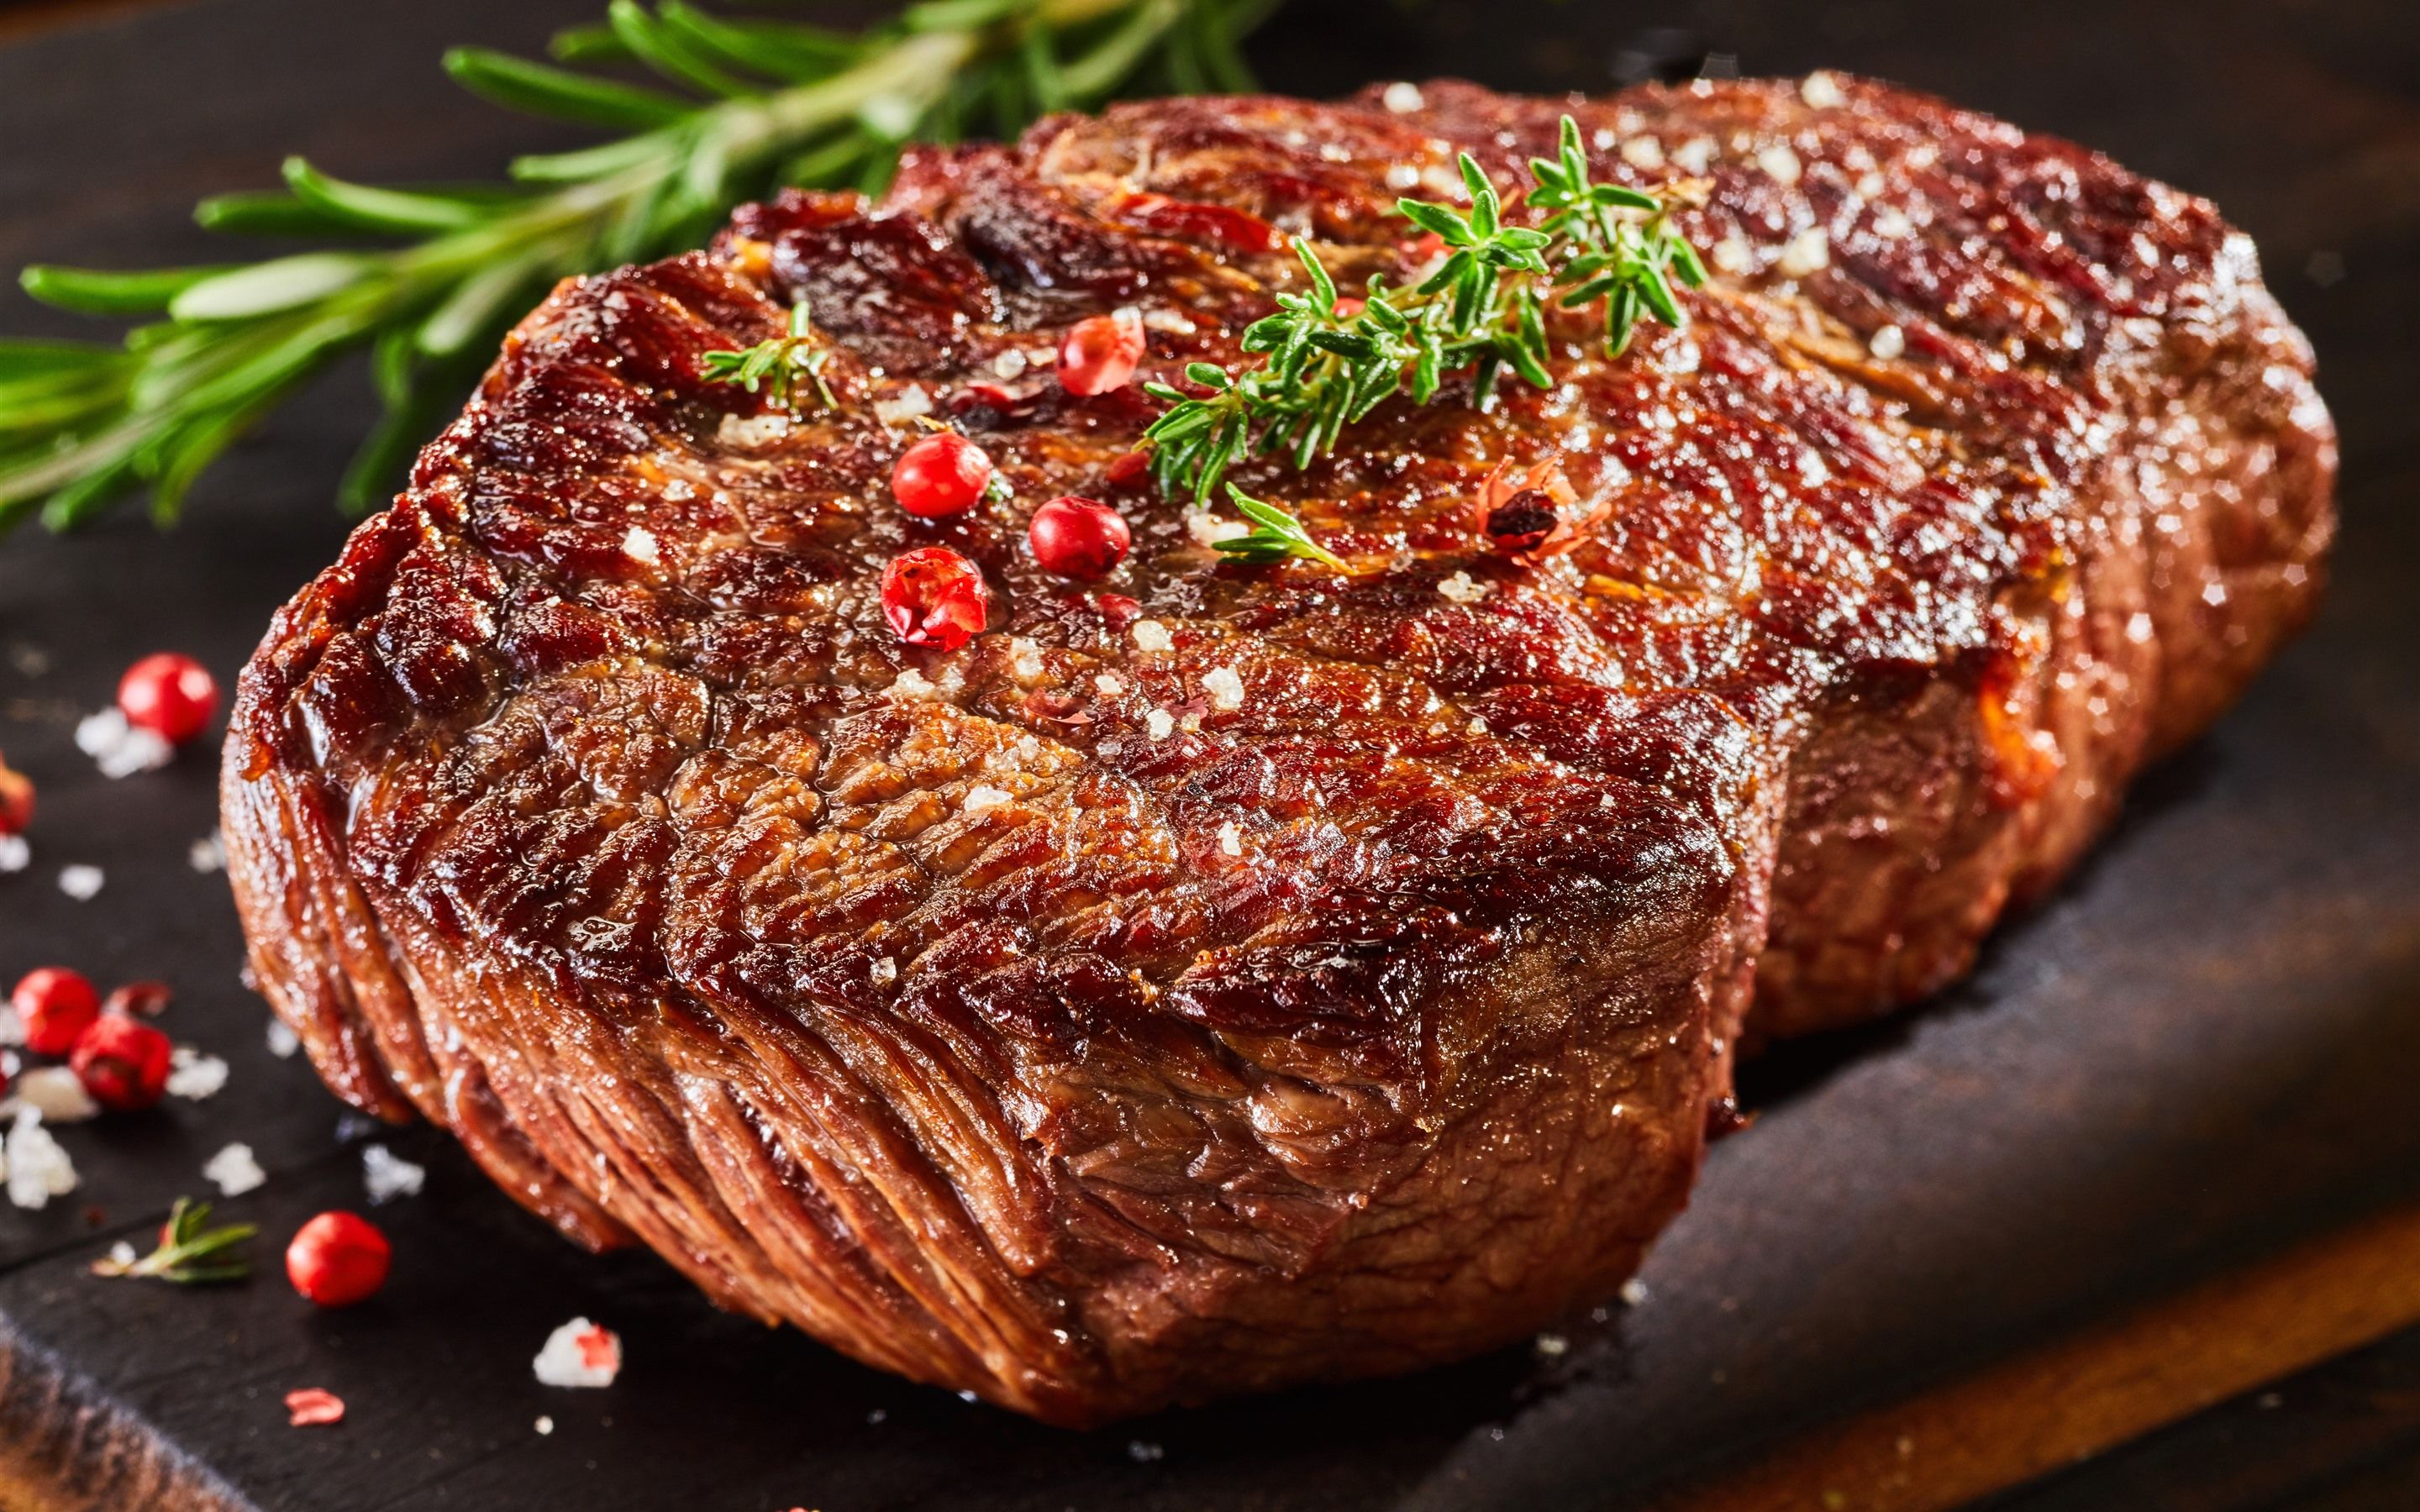 Steak, Meat, Barbecue 1242x2688 IPhone 11 Pro XS Max Wallpaper, Background, Picture, Image